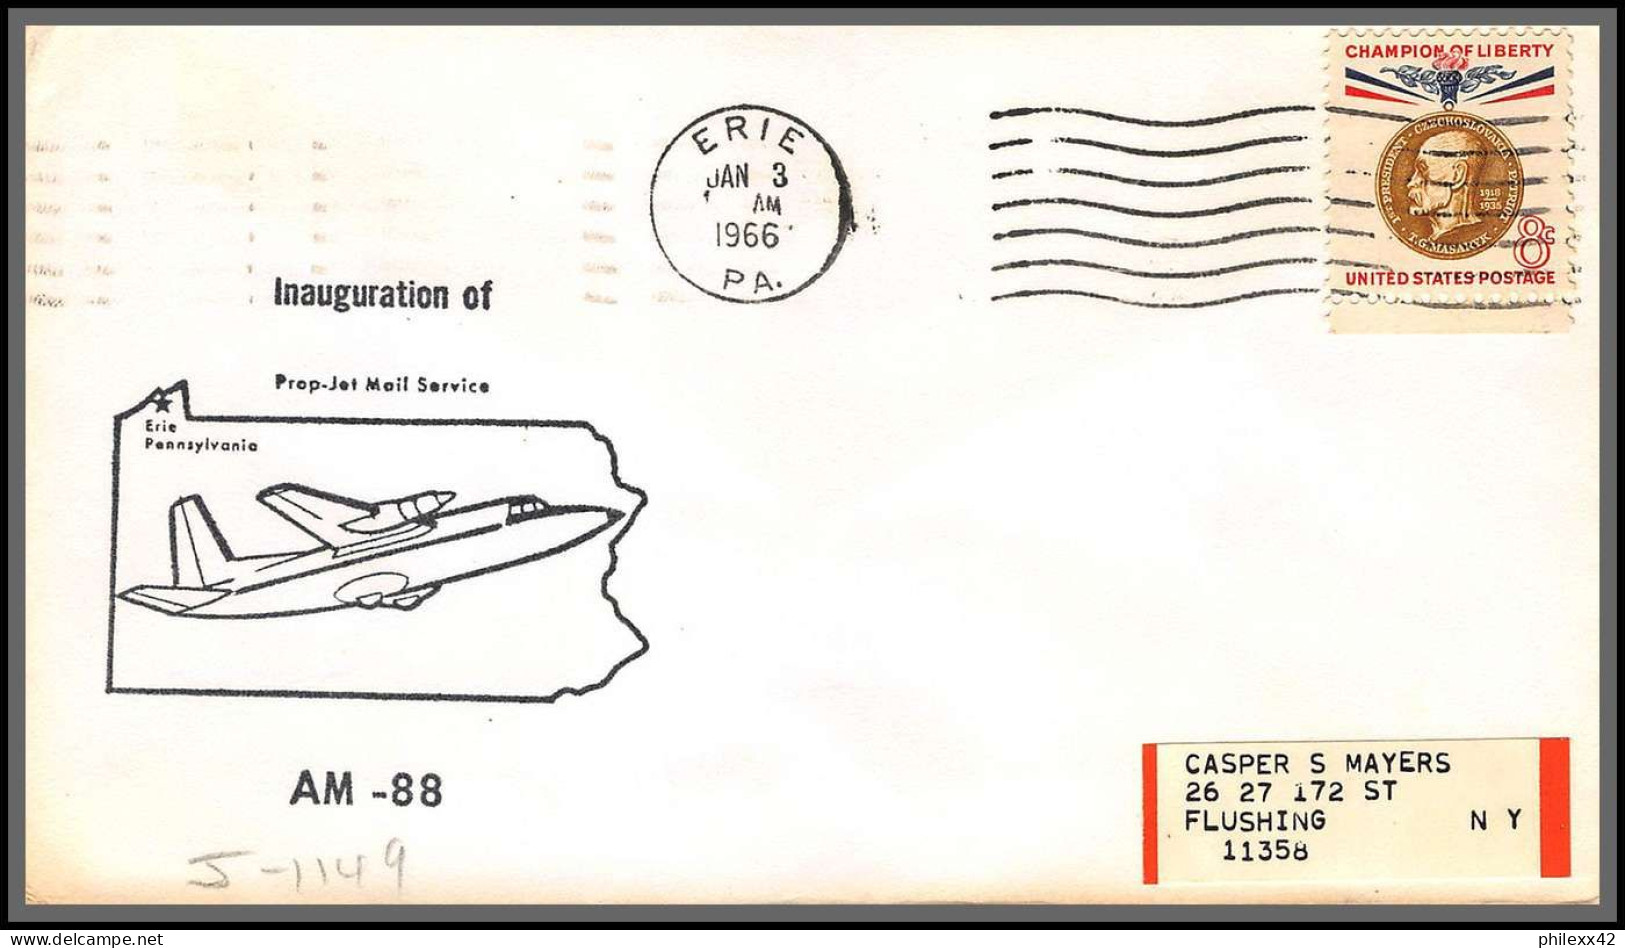 12438 Am 88 Inauguration Prop Jet Mail Service Erie 3/1/1966 Premier Vol First Flight Lettre Airmail Cover Usa Aviation - 3c. 1961-... Storia Postale